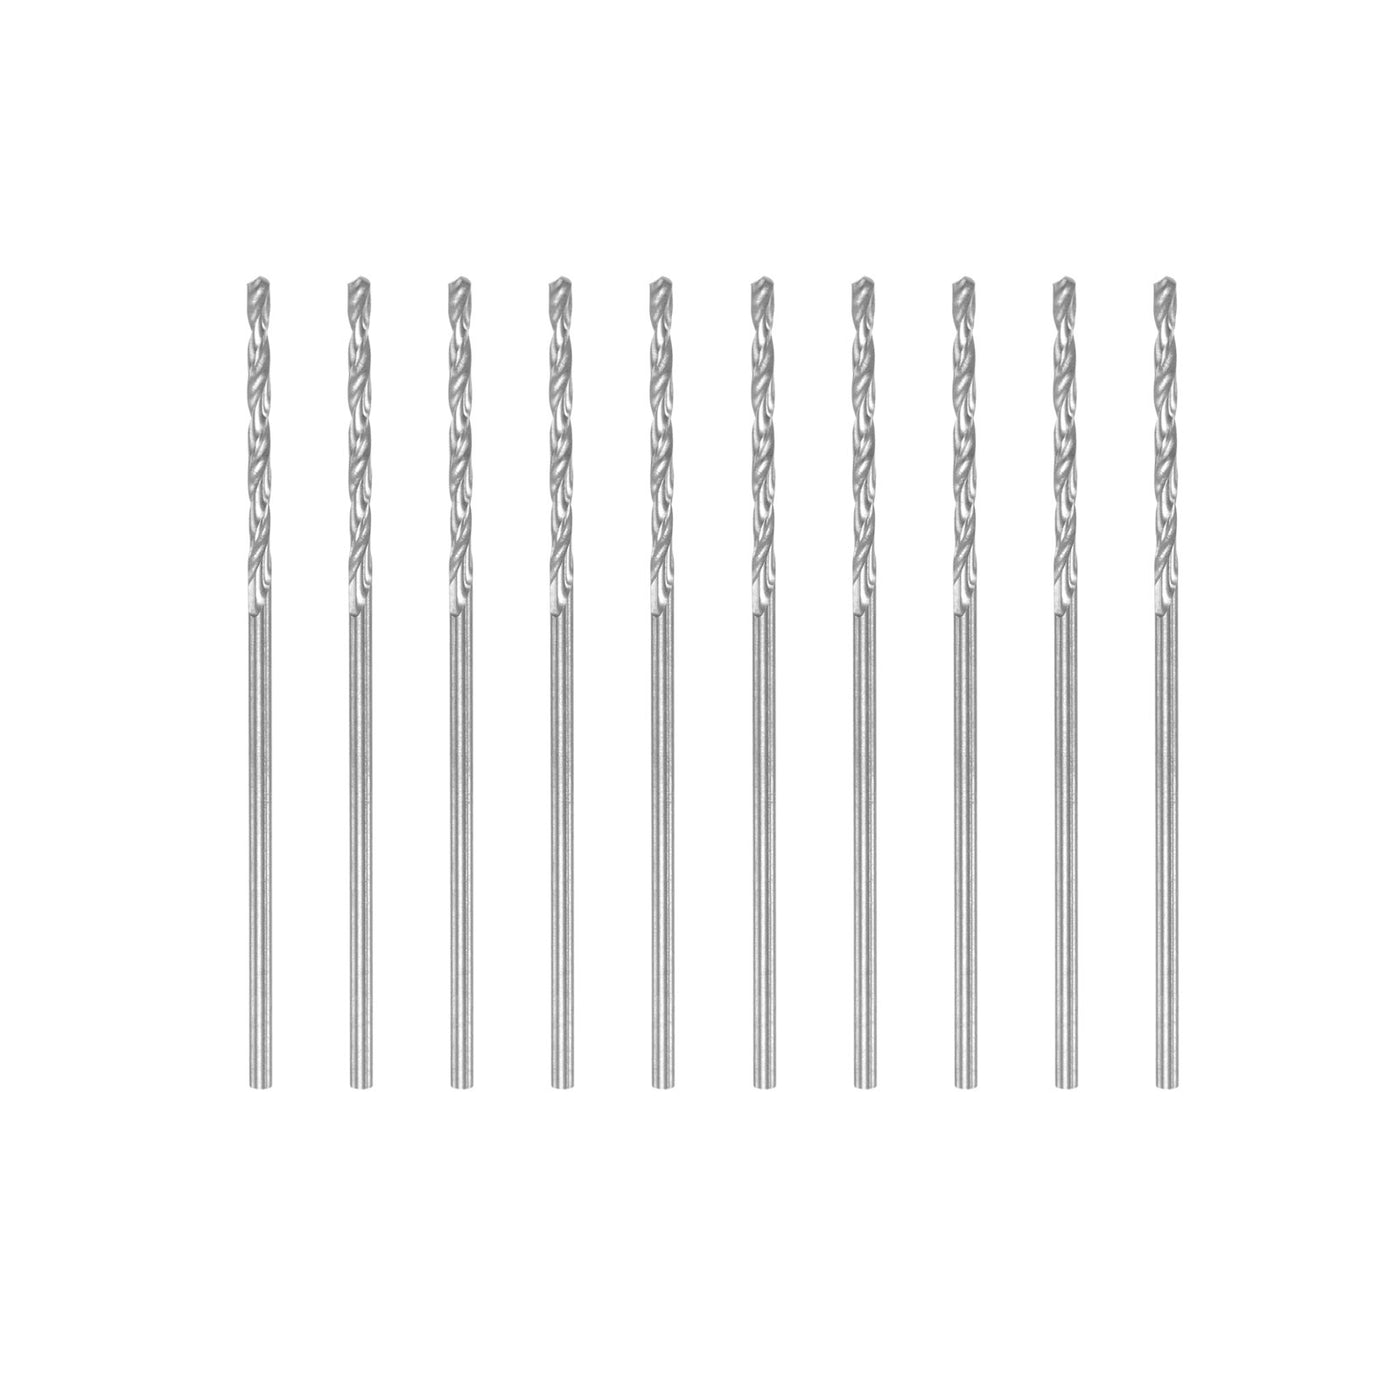 uxcell Uxcell 10 Pcs 1mm High Speed Steel Drill Bits, Fully Ground 34mm Length Drill Bit